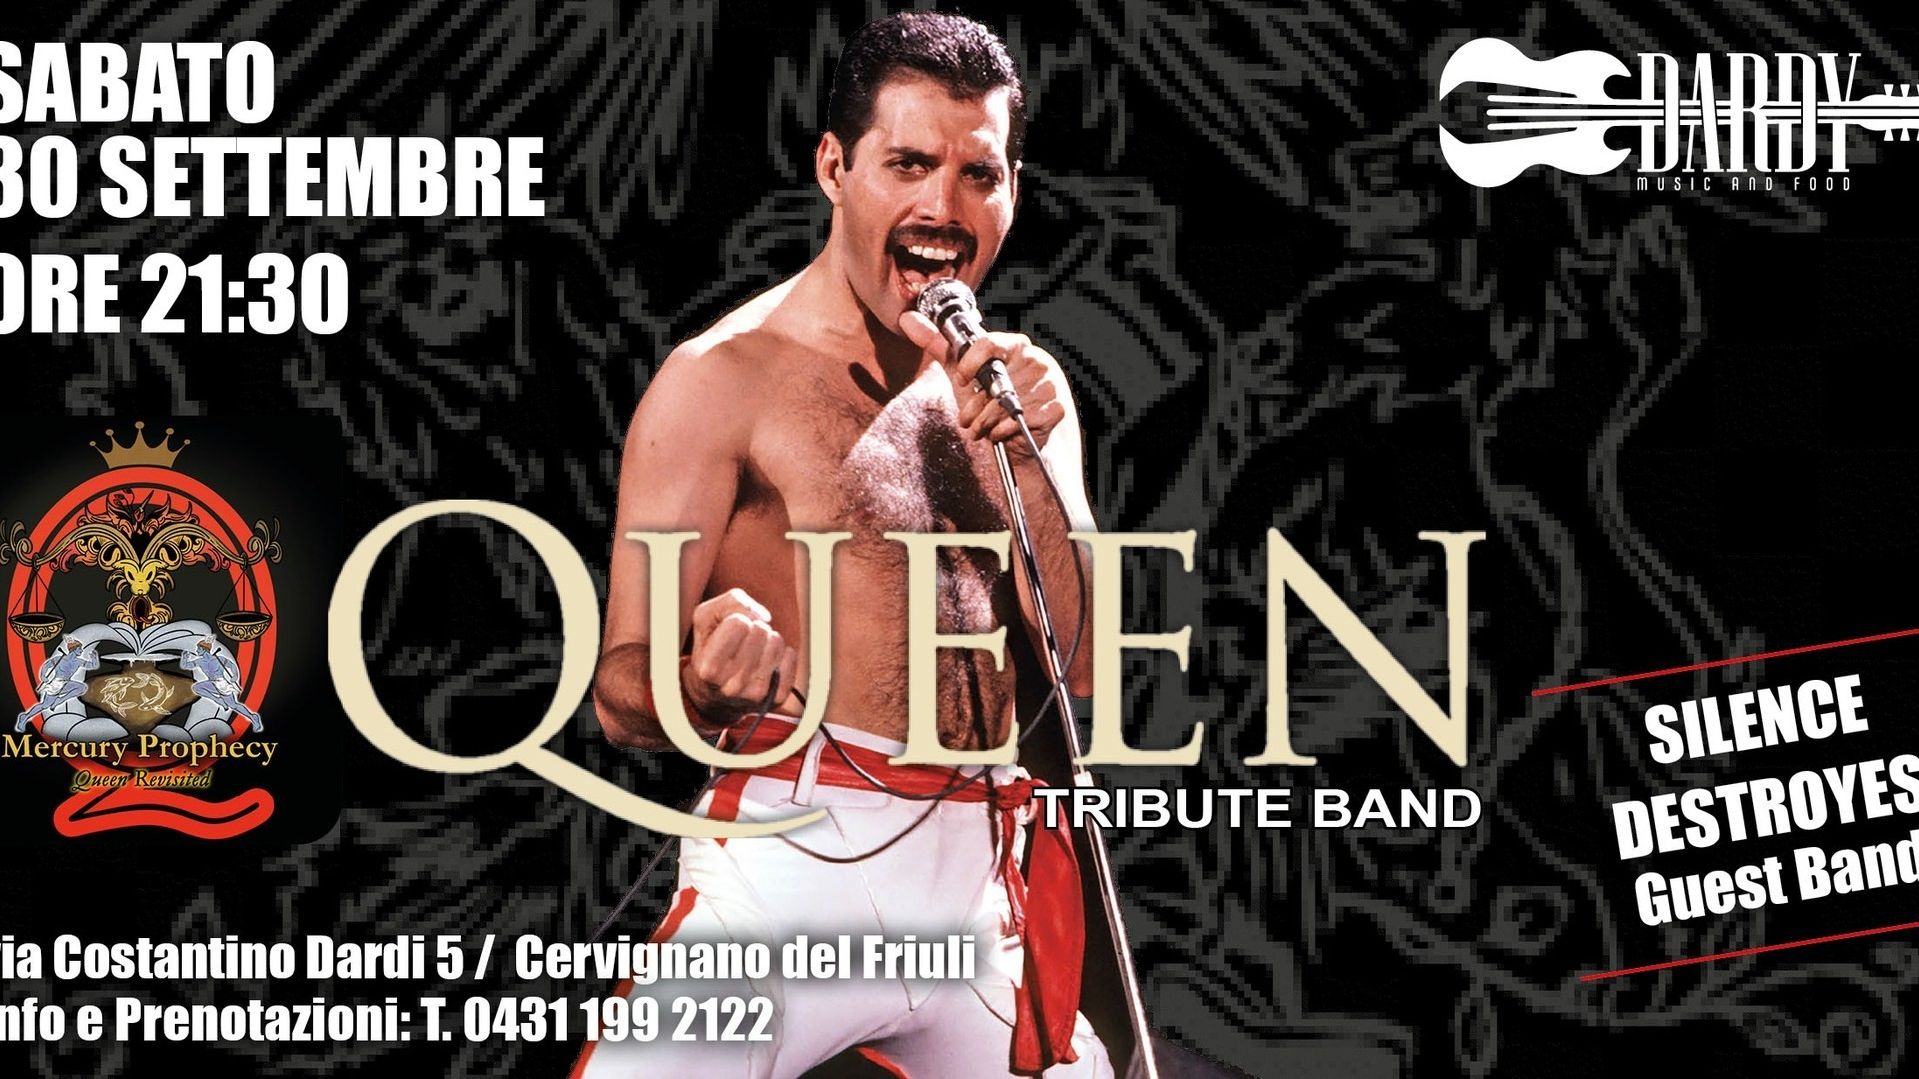 Mercury Prophecy / Queen Tribute Band